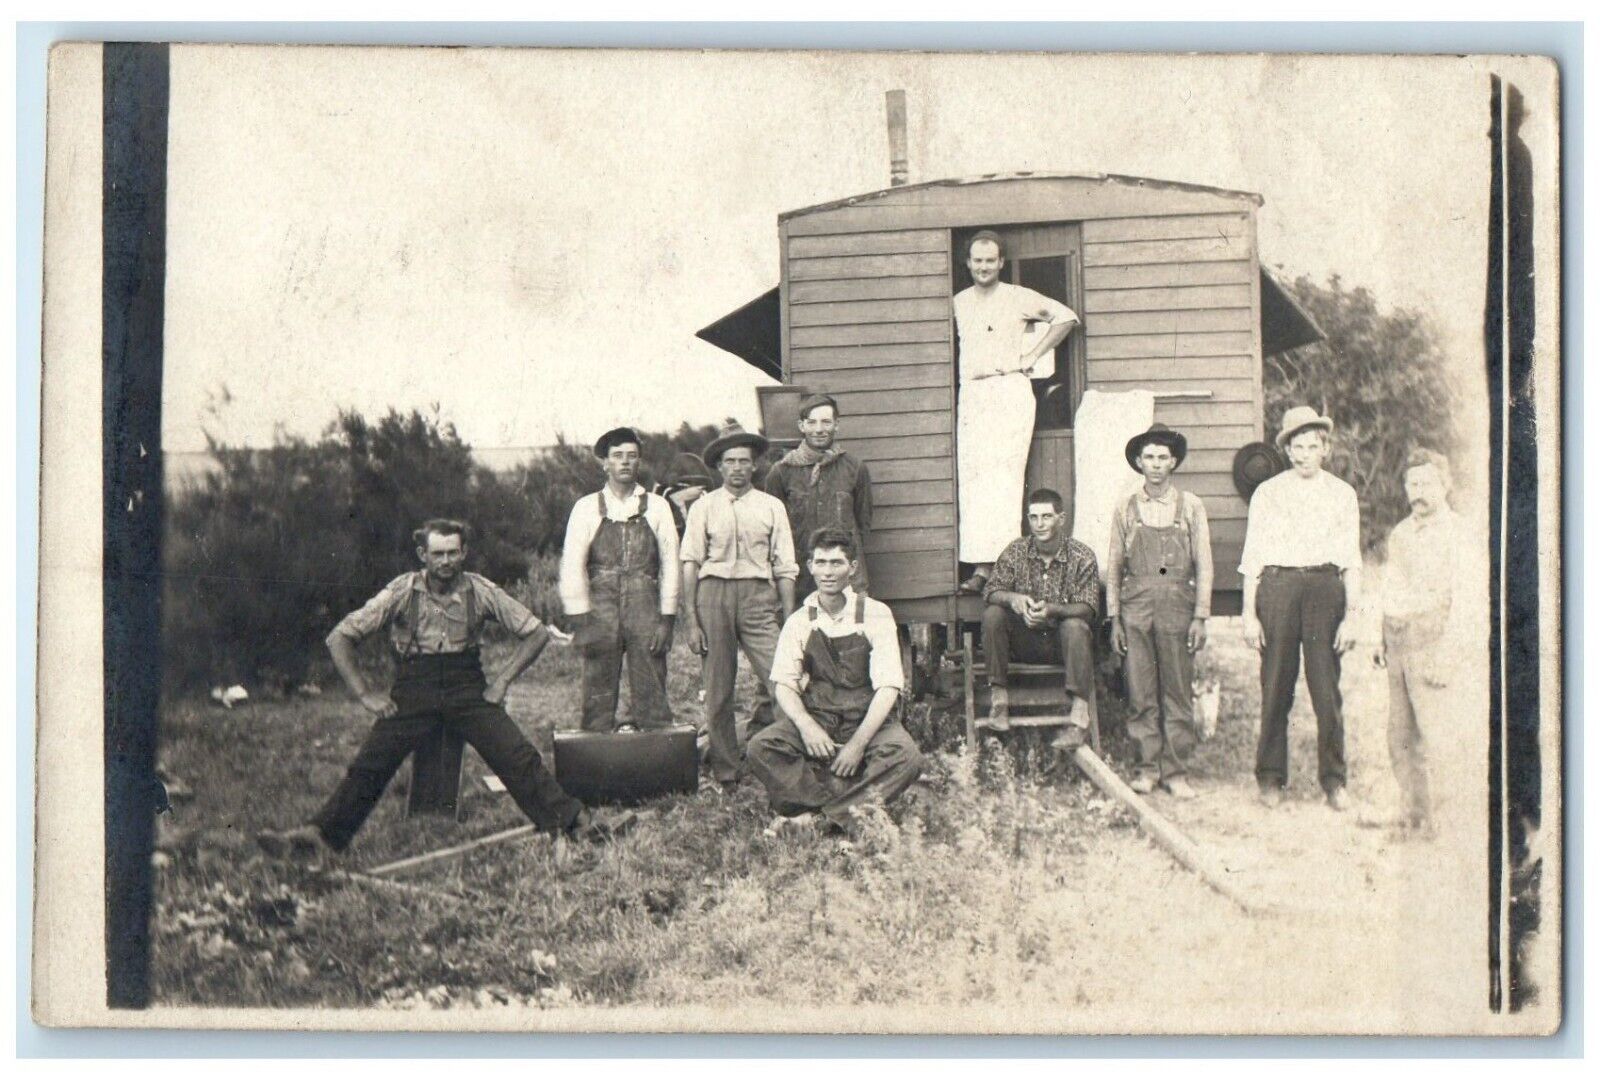 1910 Exterior Occupational Employee Lunch Wagon Cook Vintage RPPC Photo Postcard